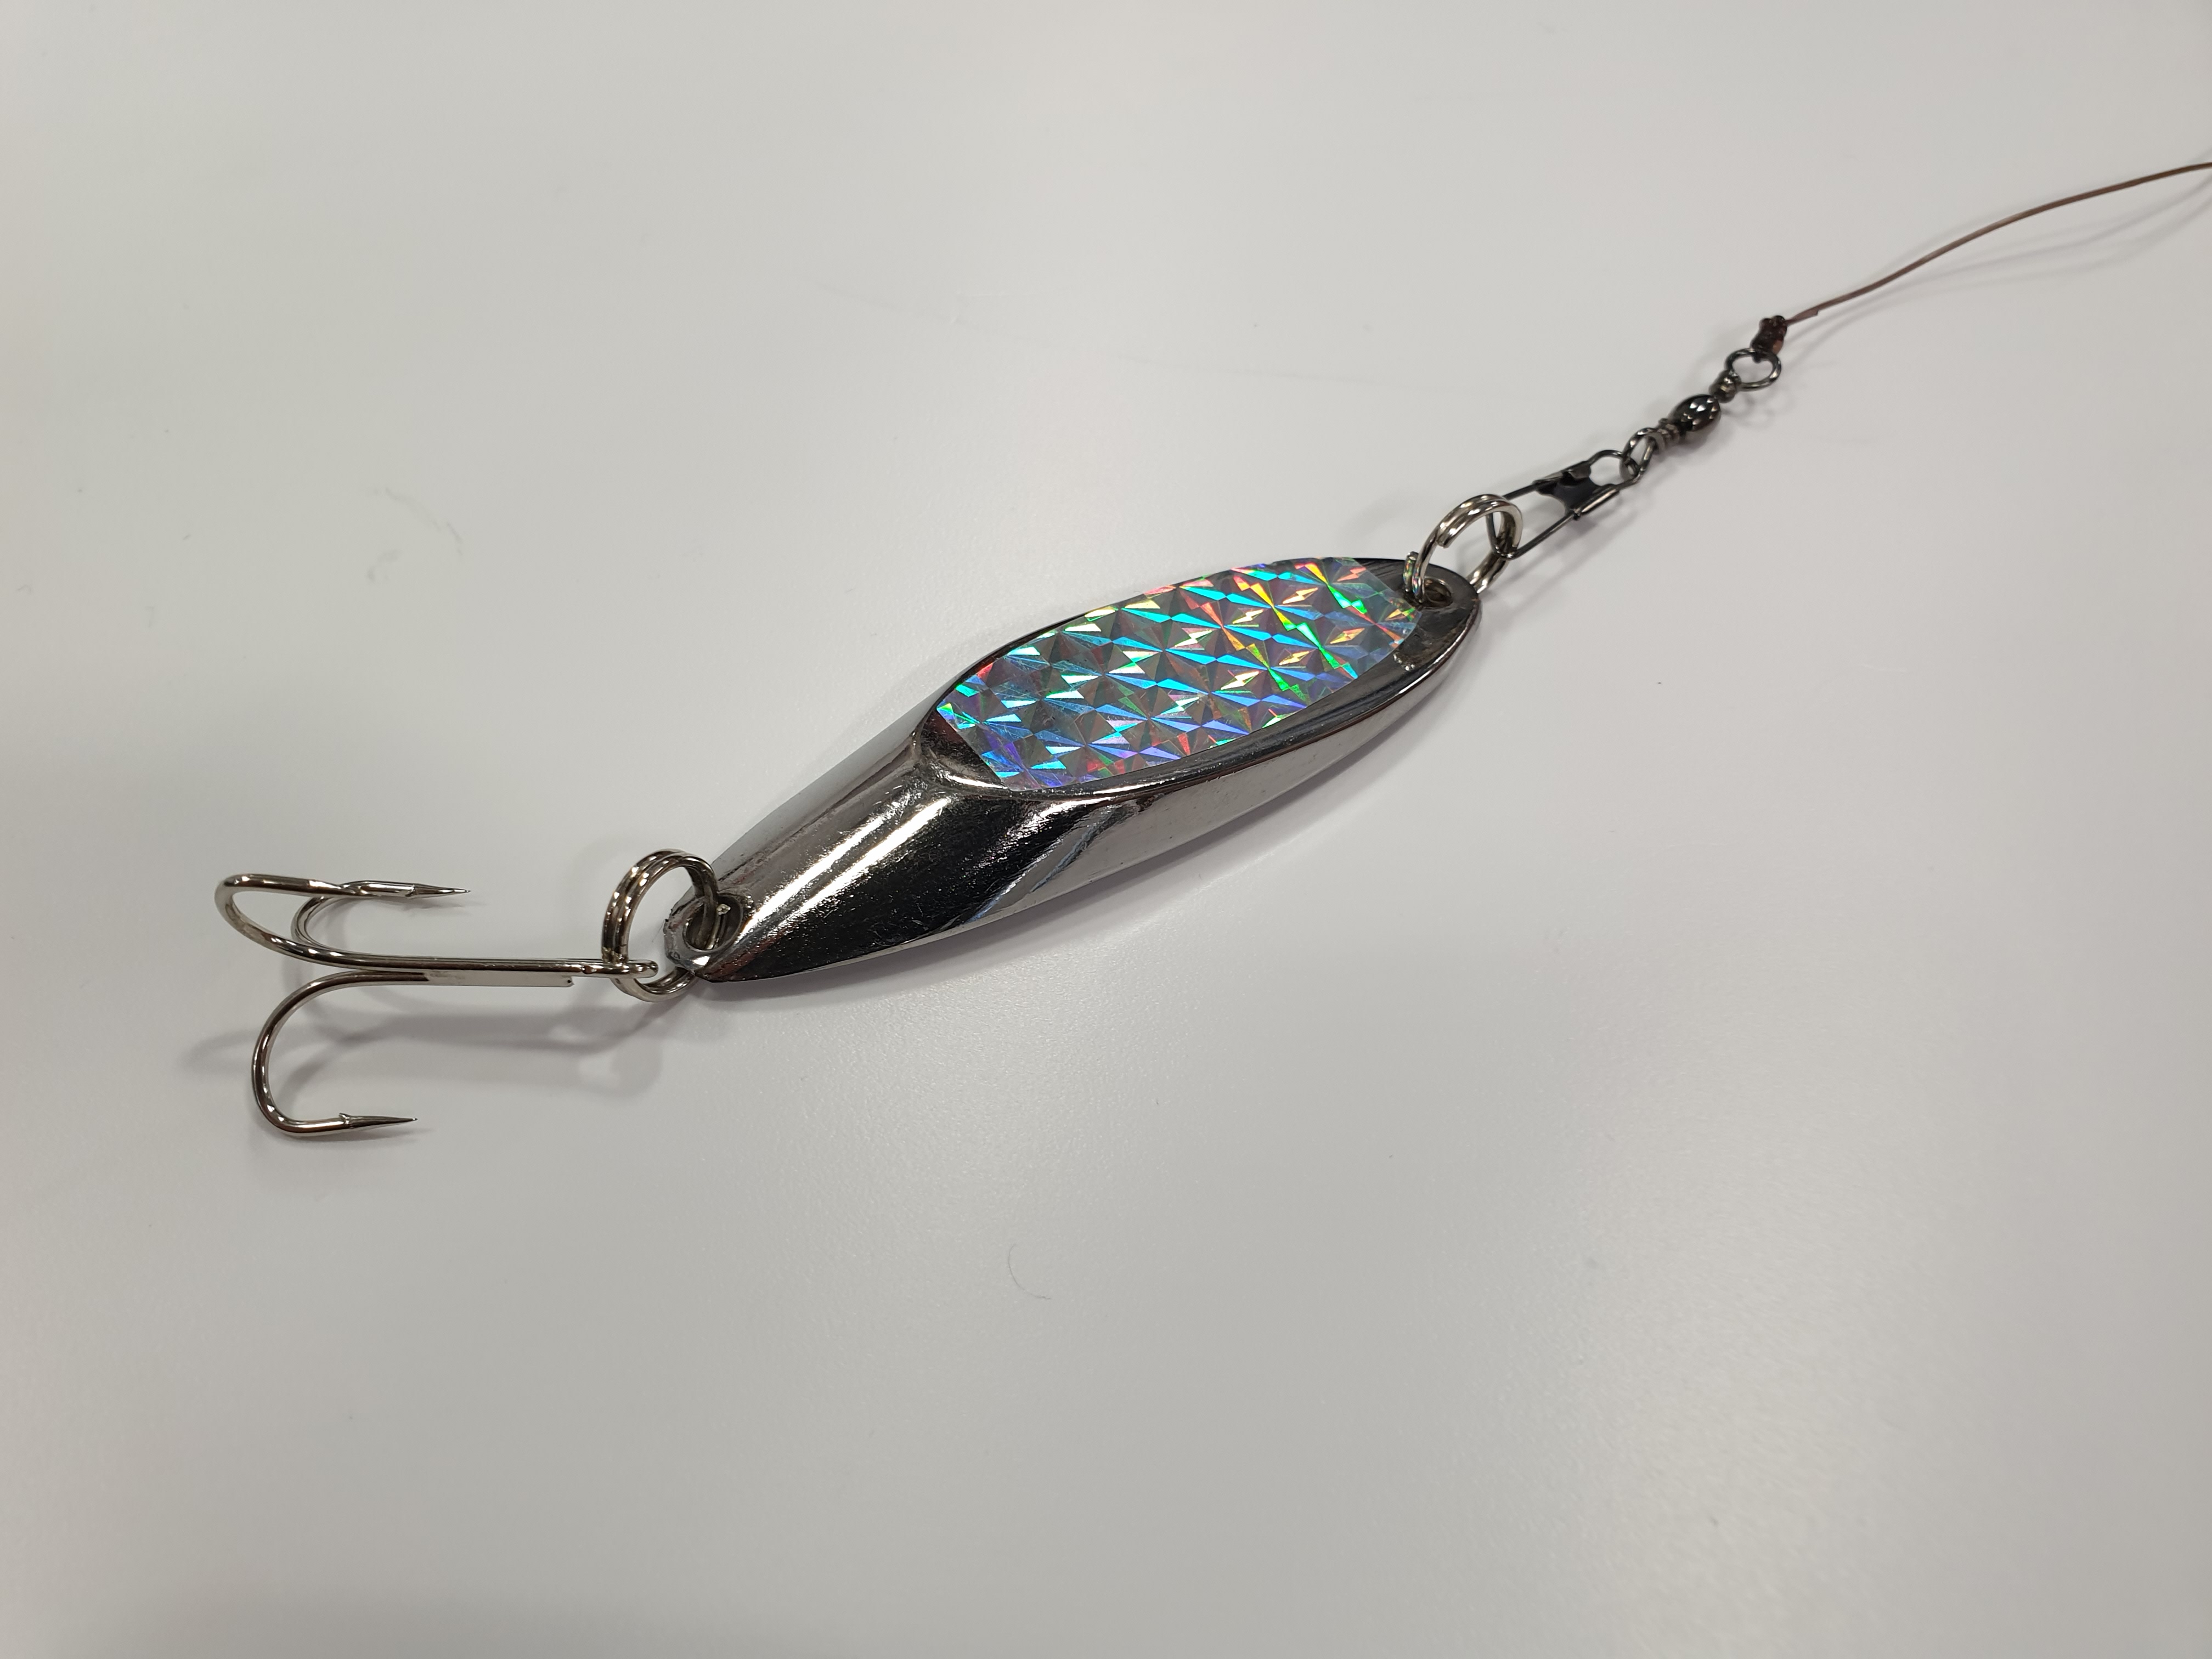 4 Mackerel Feathers Pre Tied Rig, Fishing Tackle